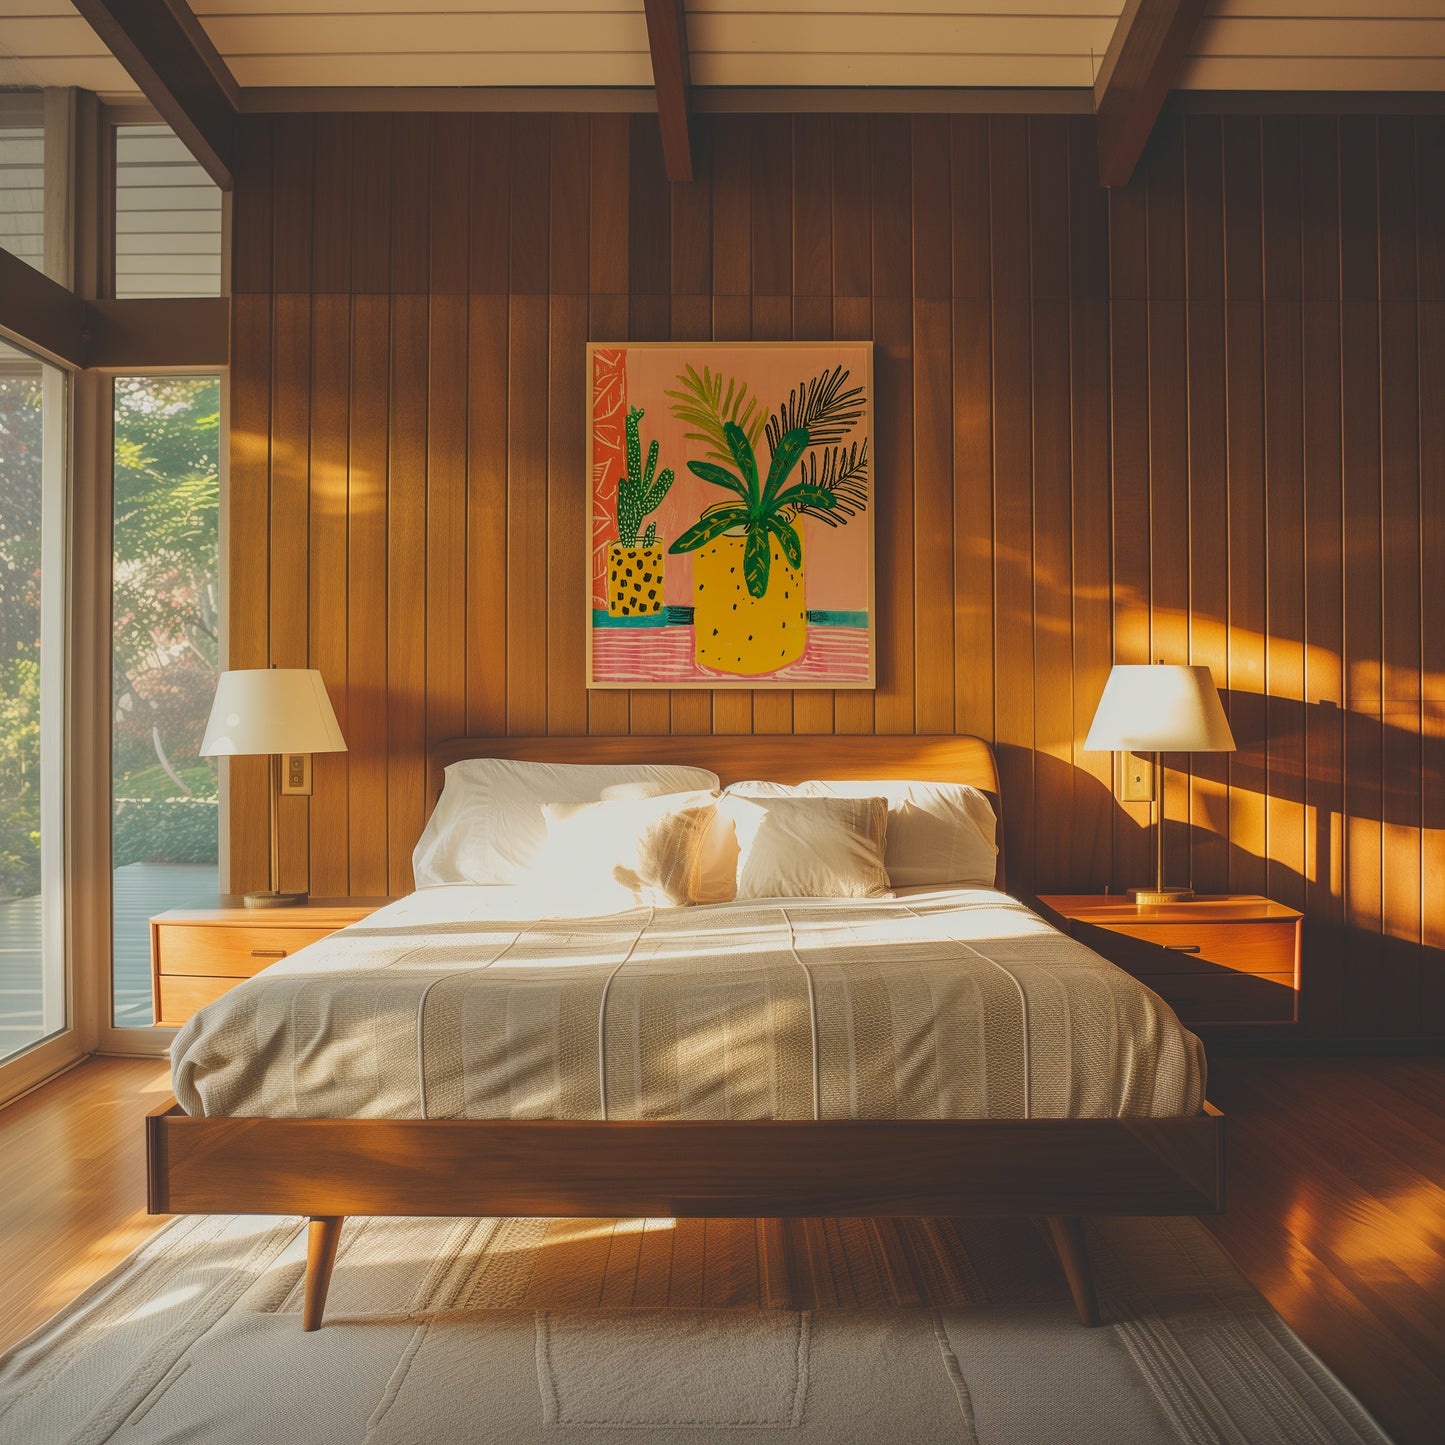 Sunlit cozy bedroom with a modern bed, wooden walls, and colorful artwork.